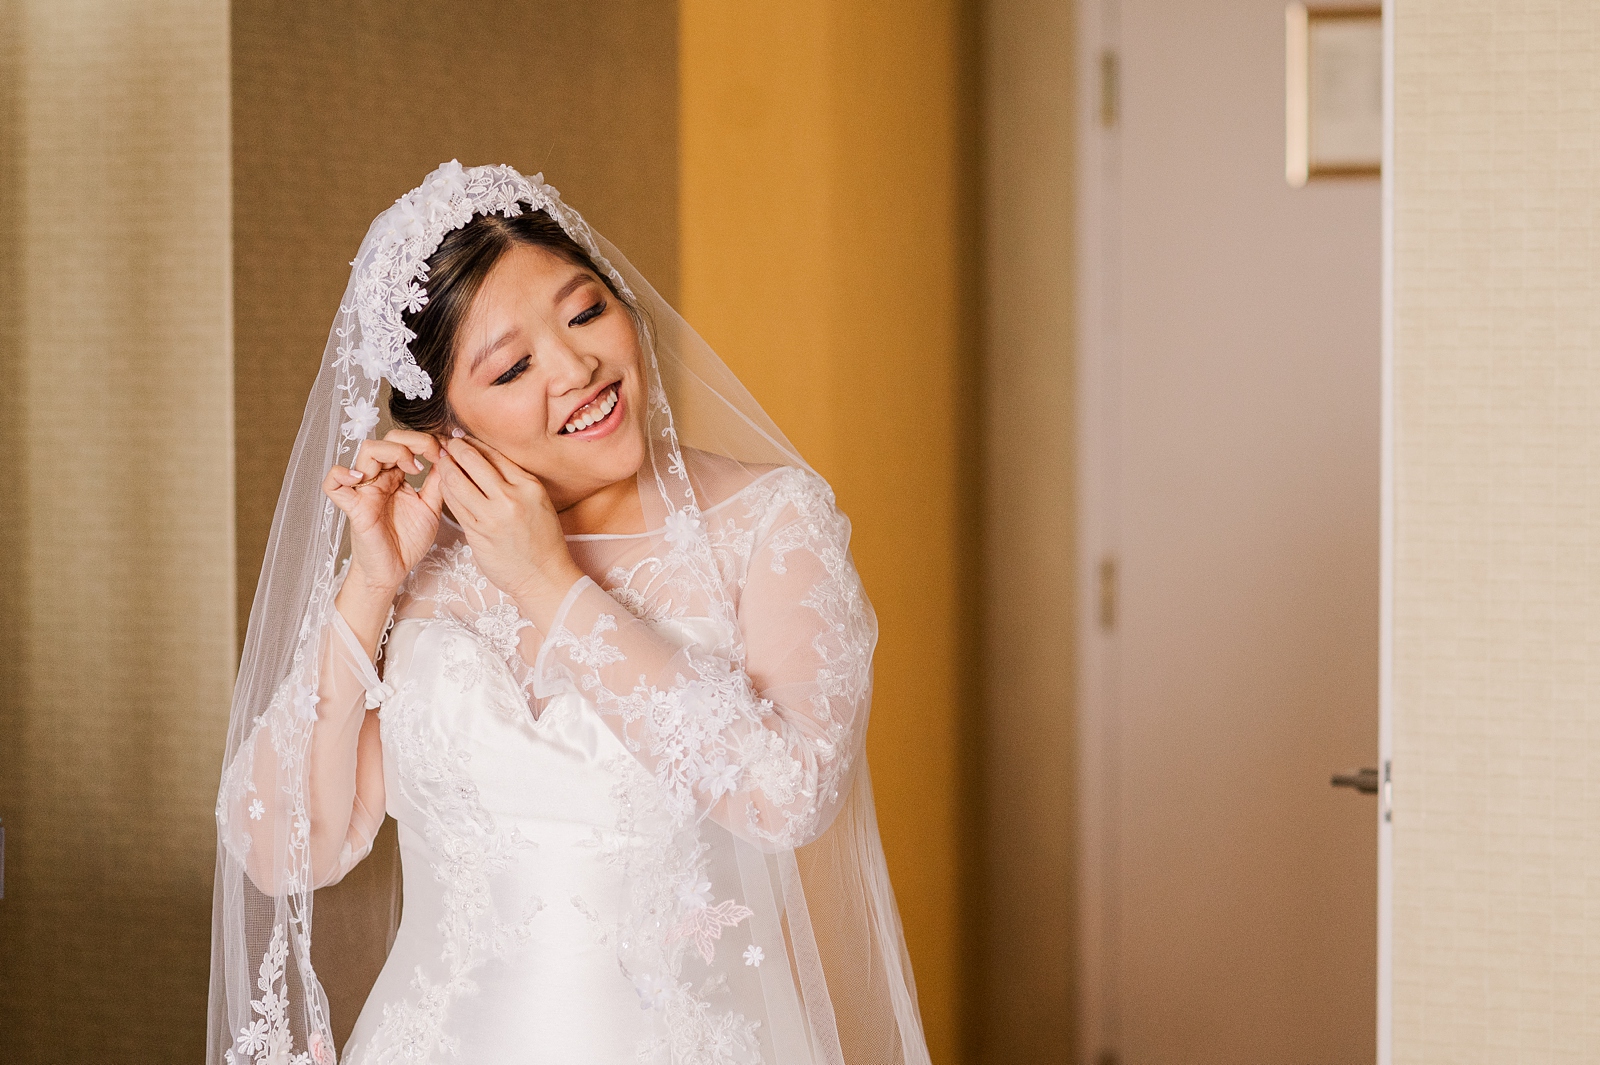 Bride Getting Ready at Richmond Omni Hotel Intimate Wedding. Photography by Virginia Intimate Wedding Photographer Kailey Brianne Photography.
